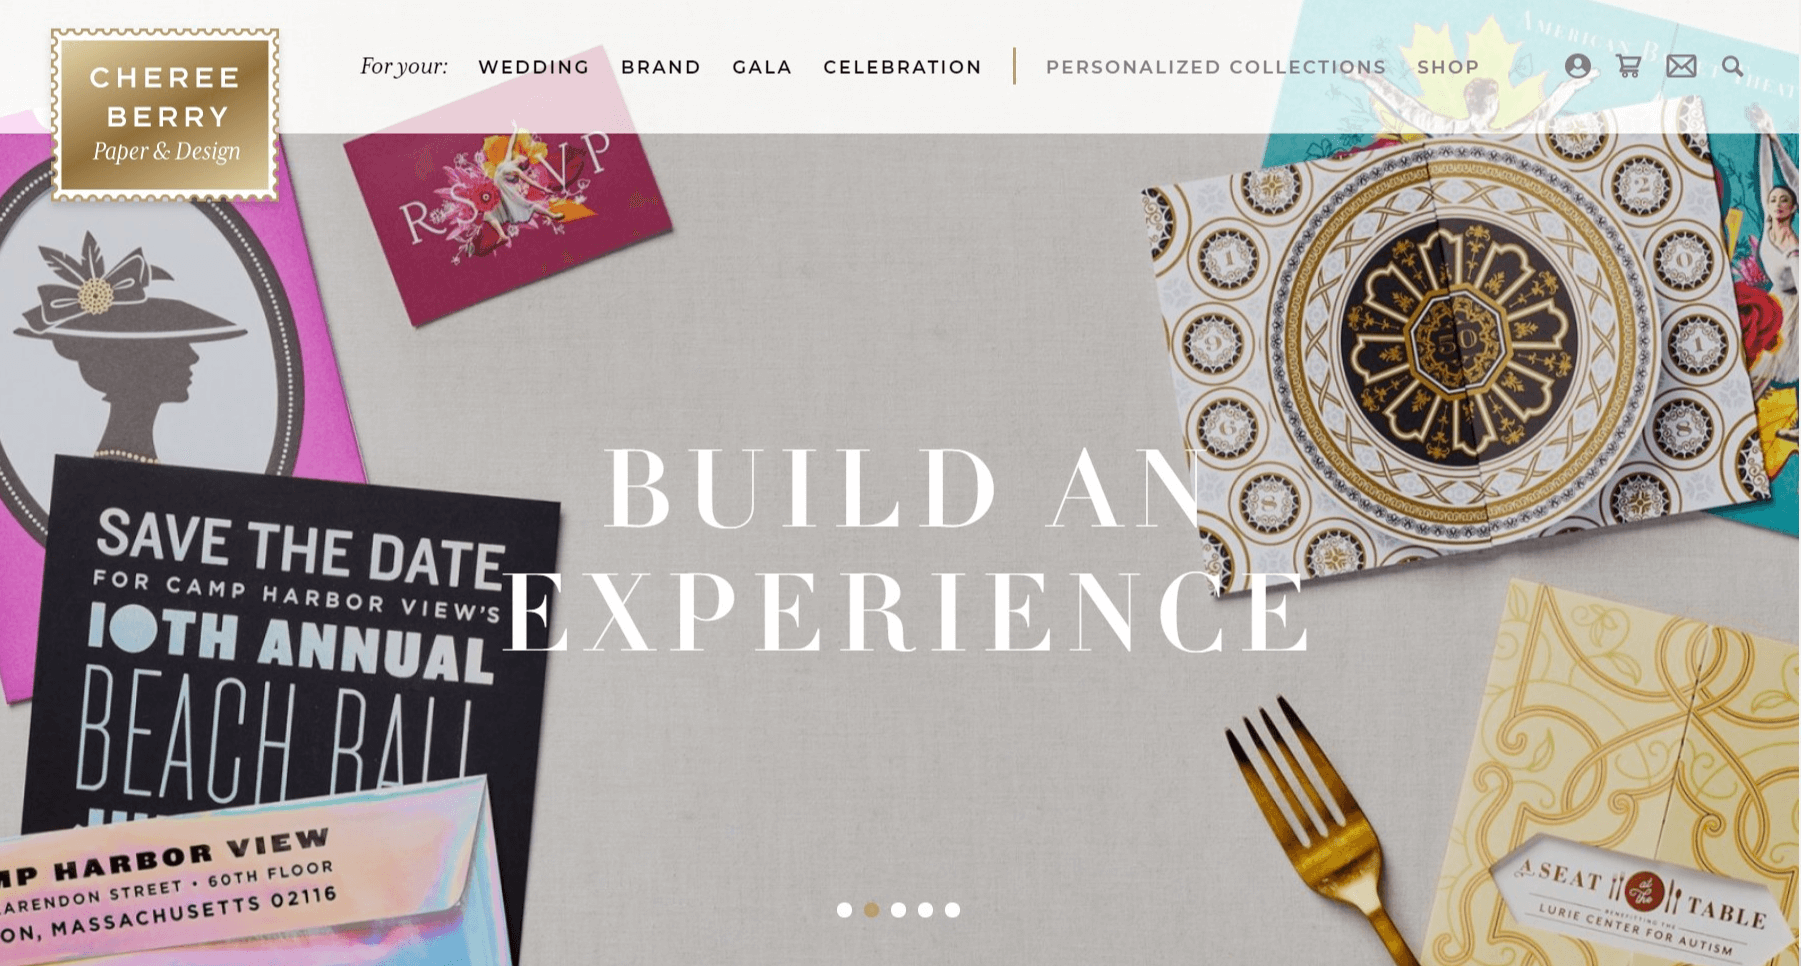 The homepage of Cheree Berry Paper & Design website with a nice flat lay of invitations